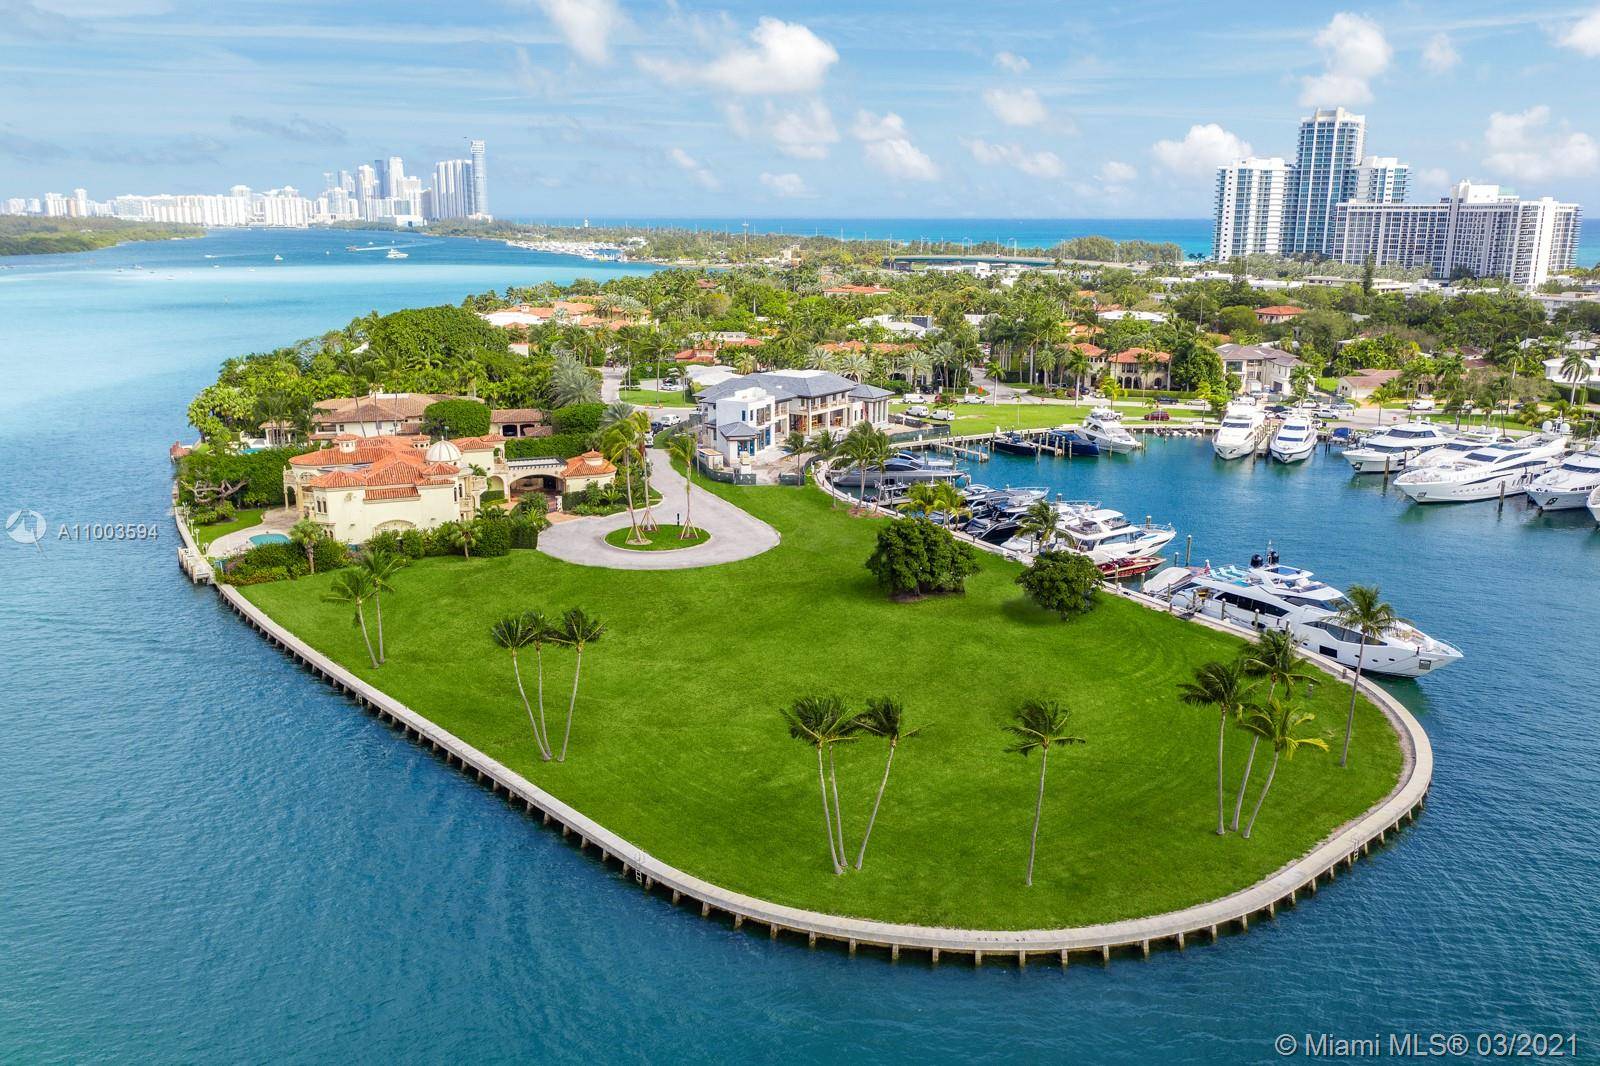 200 Bal Bay Drive, the most special home site in South Florida is available for purchase for the first time ever.